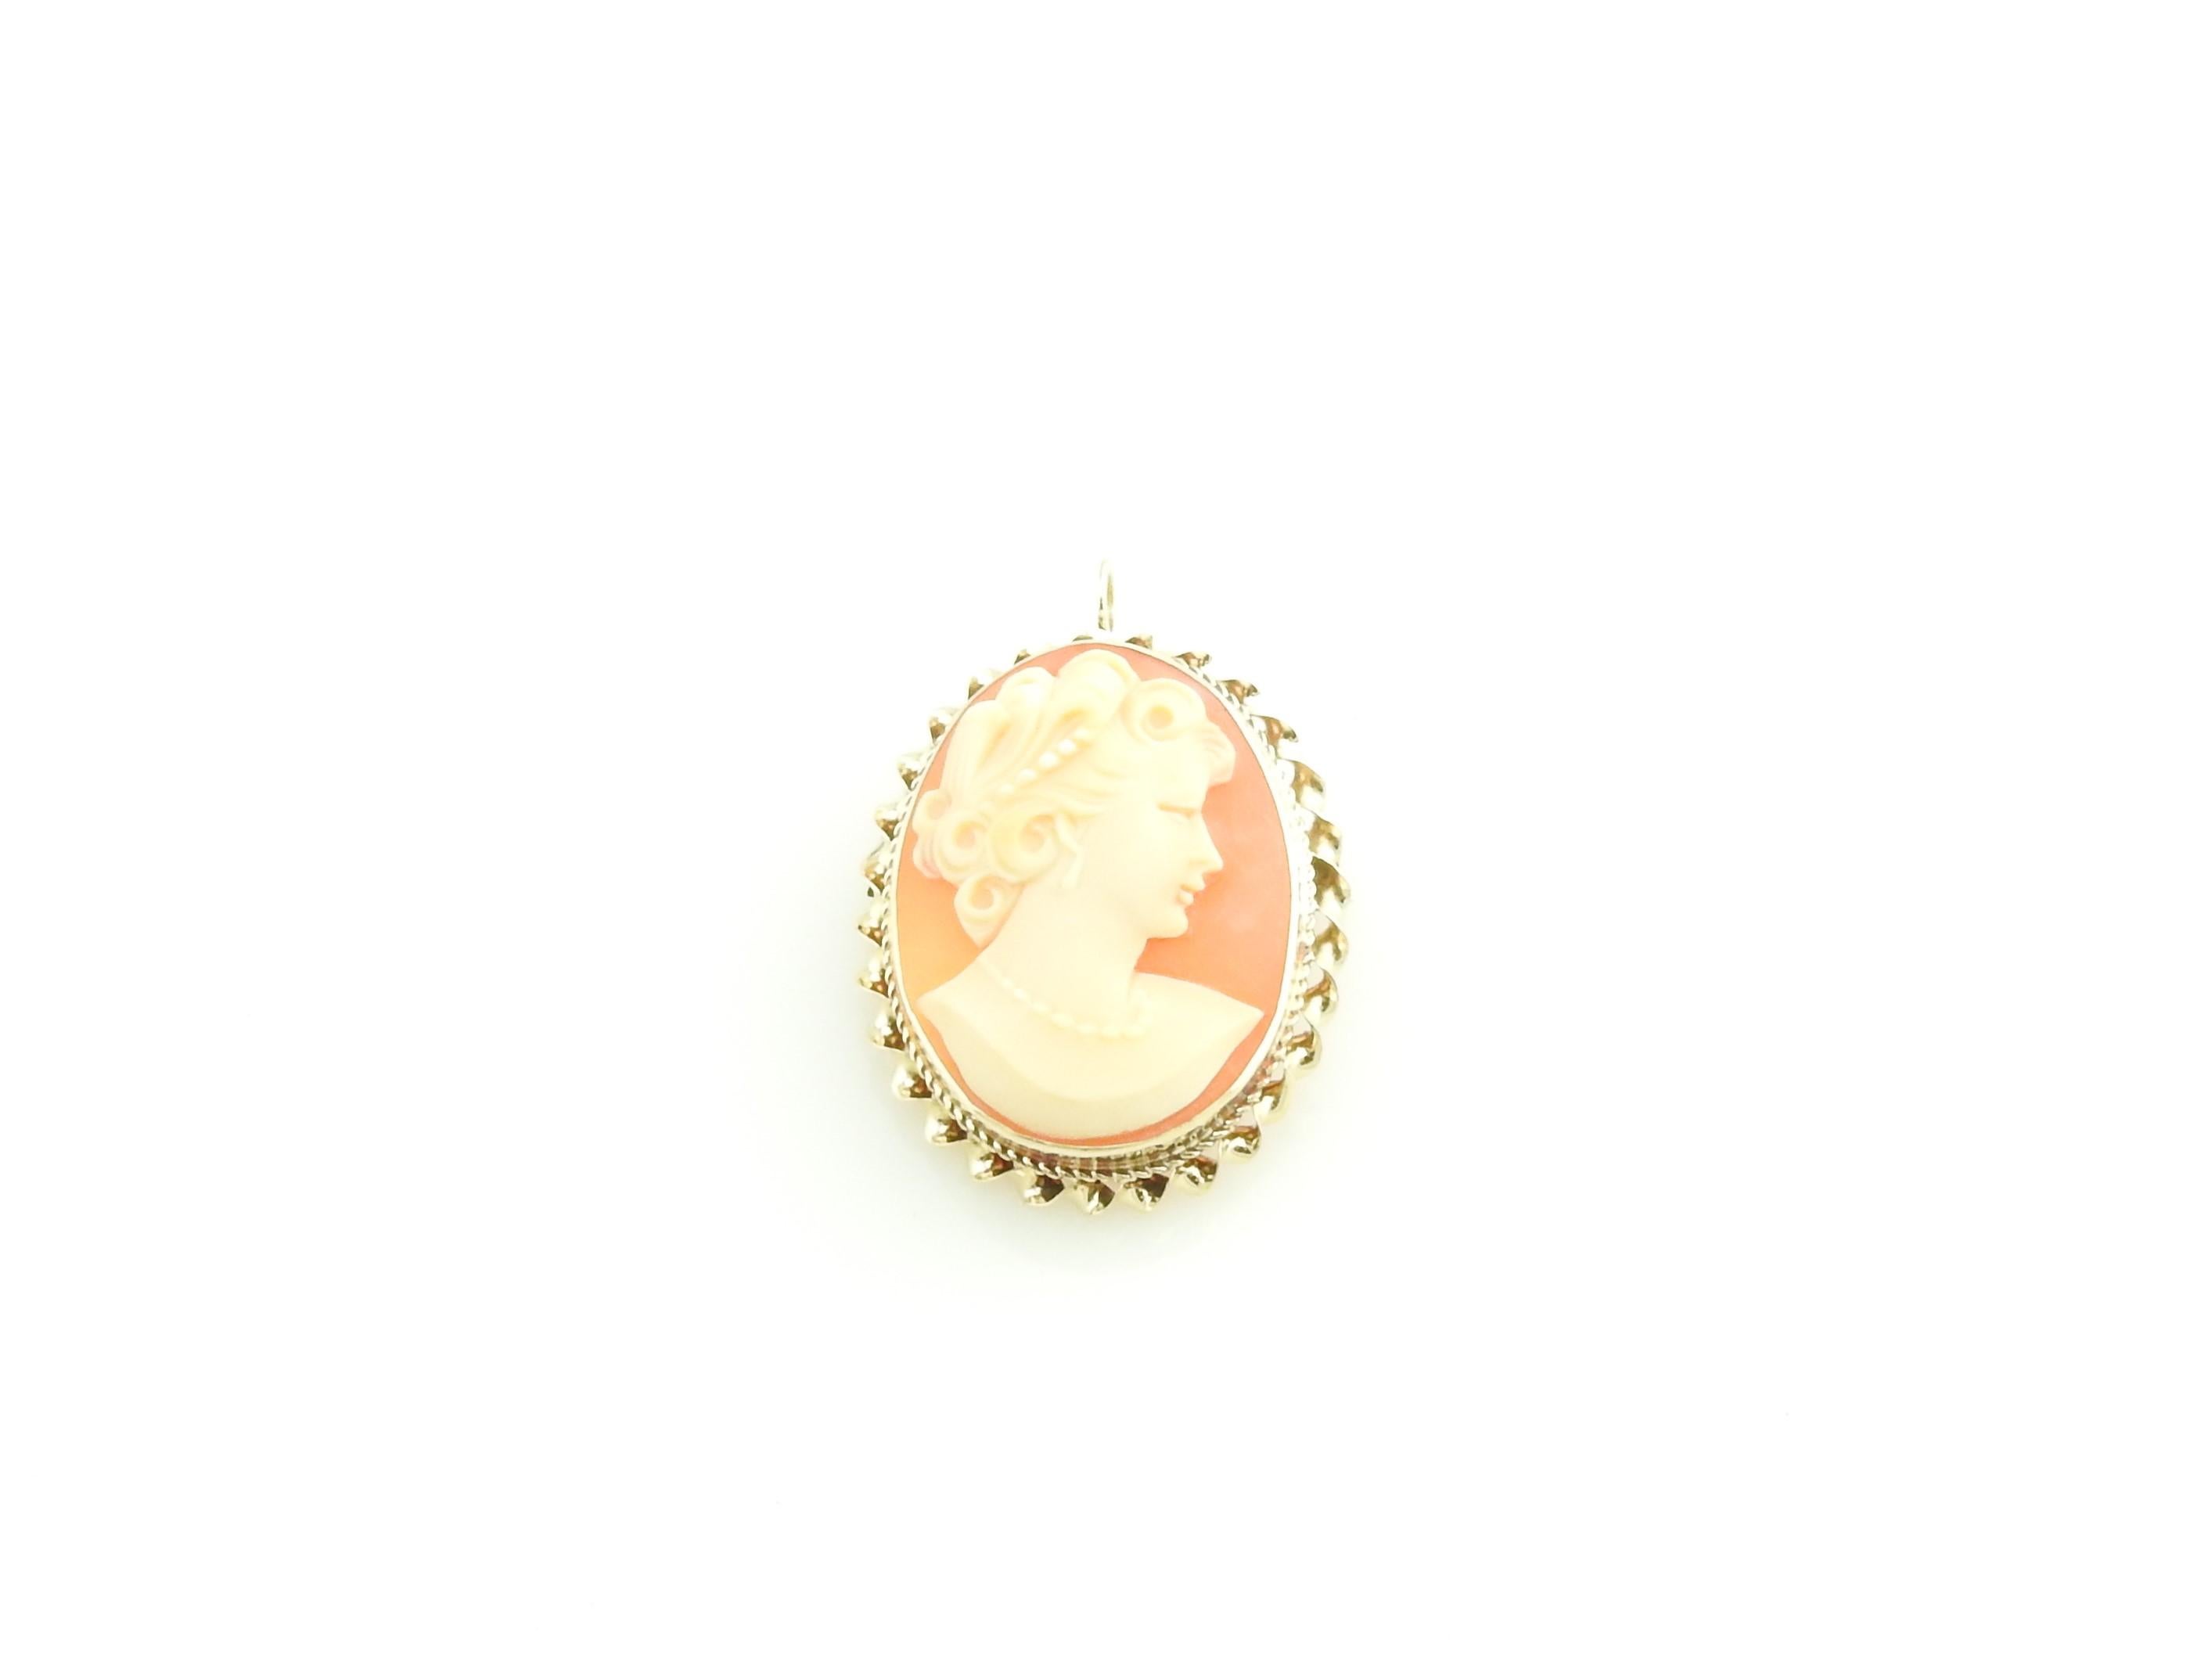 Vintage 14 Karat Yellow Gold Cameo Brooch / Pendant

This lovely cameo features a lovely lady in profile framed in beautifully detailed 14K yellow gold. Can be worn as a brooch or a pendant.

Size: 28 mm x 23 mm

Weight: 2.4 dwt. / 3.8 gr.

Acid